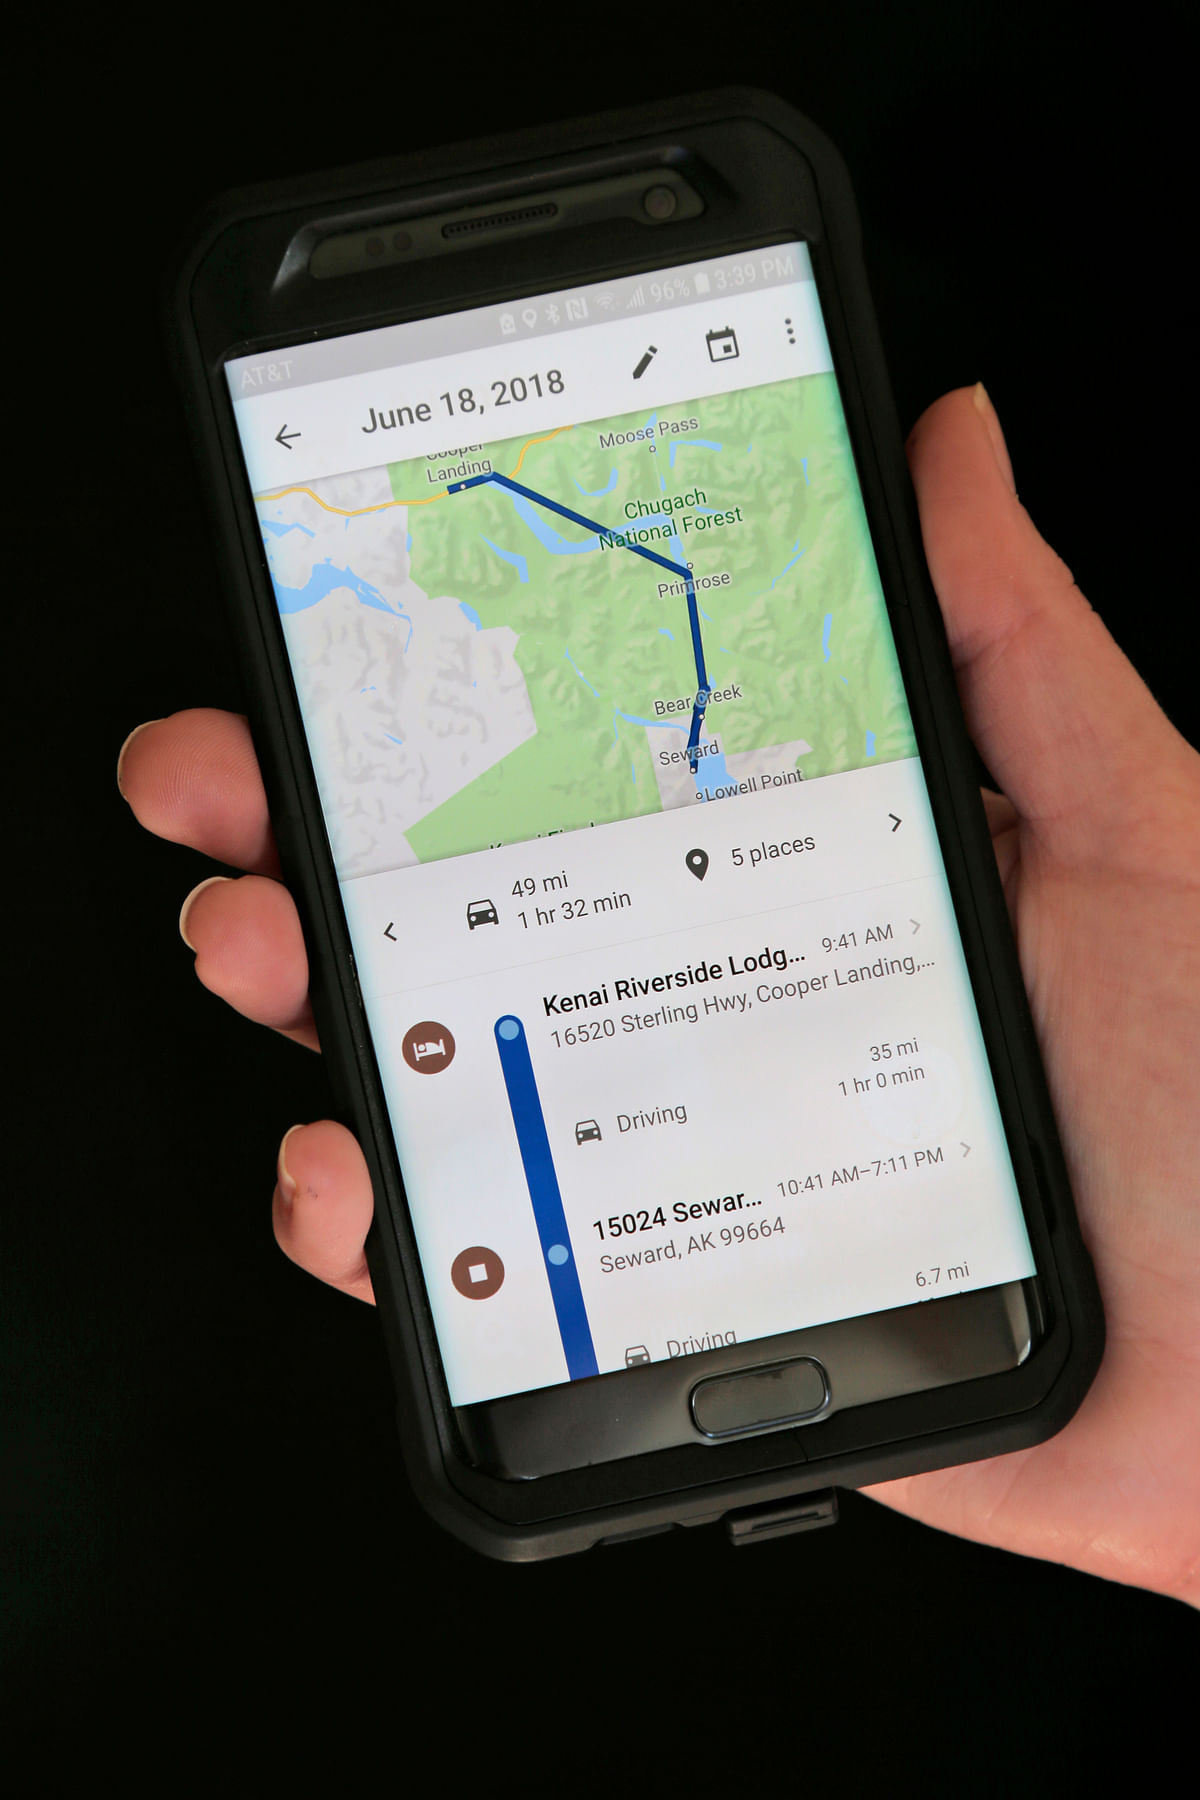 Google wants to know where you go so badly that it records your movements even when you explicitly tell it not to.